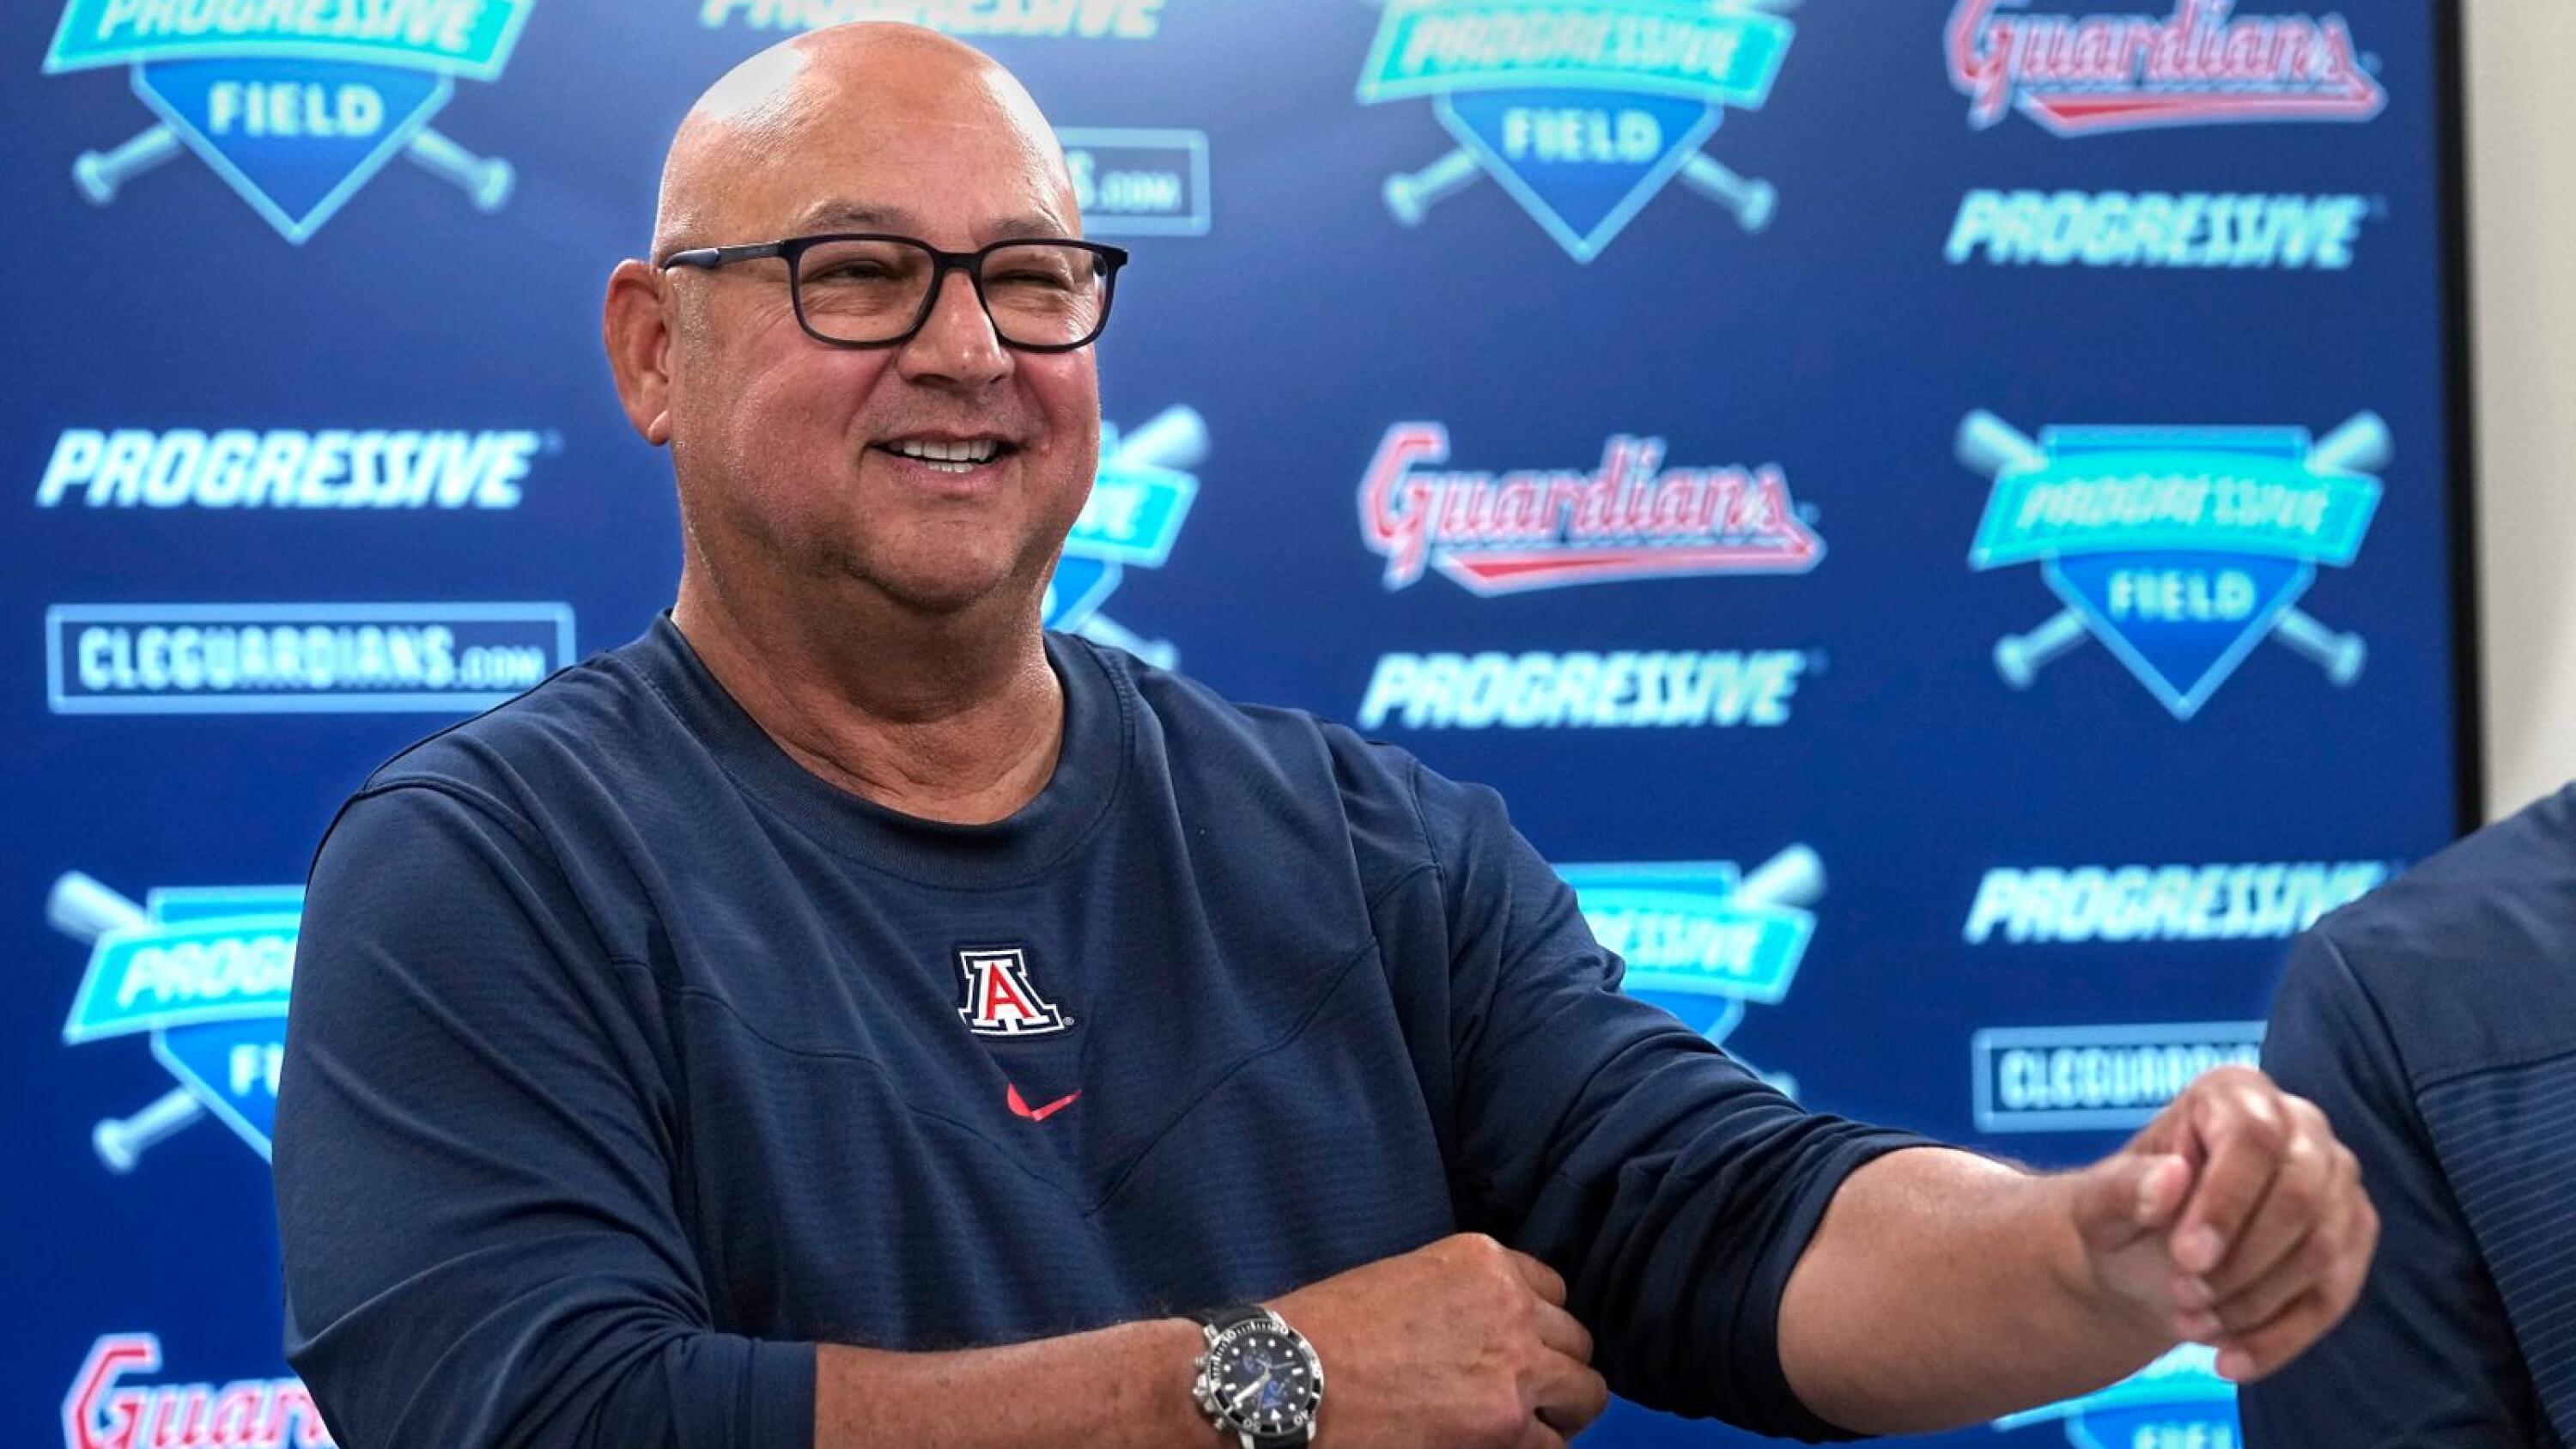 Why Terry Francona As The Manager Of The Cleveland Indians Makes Sense